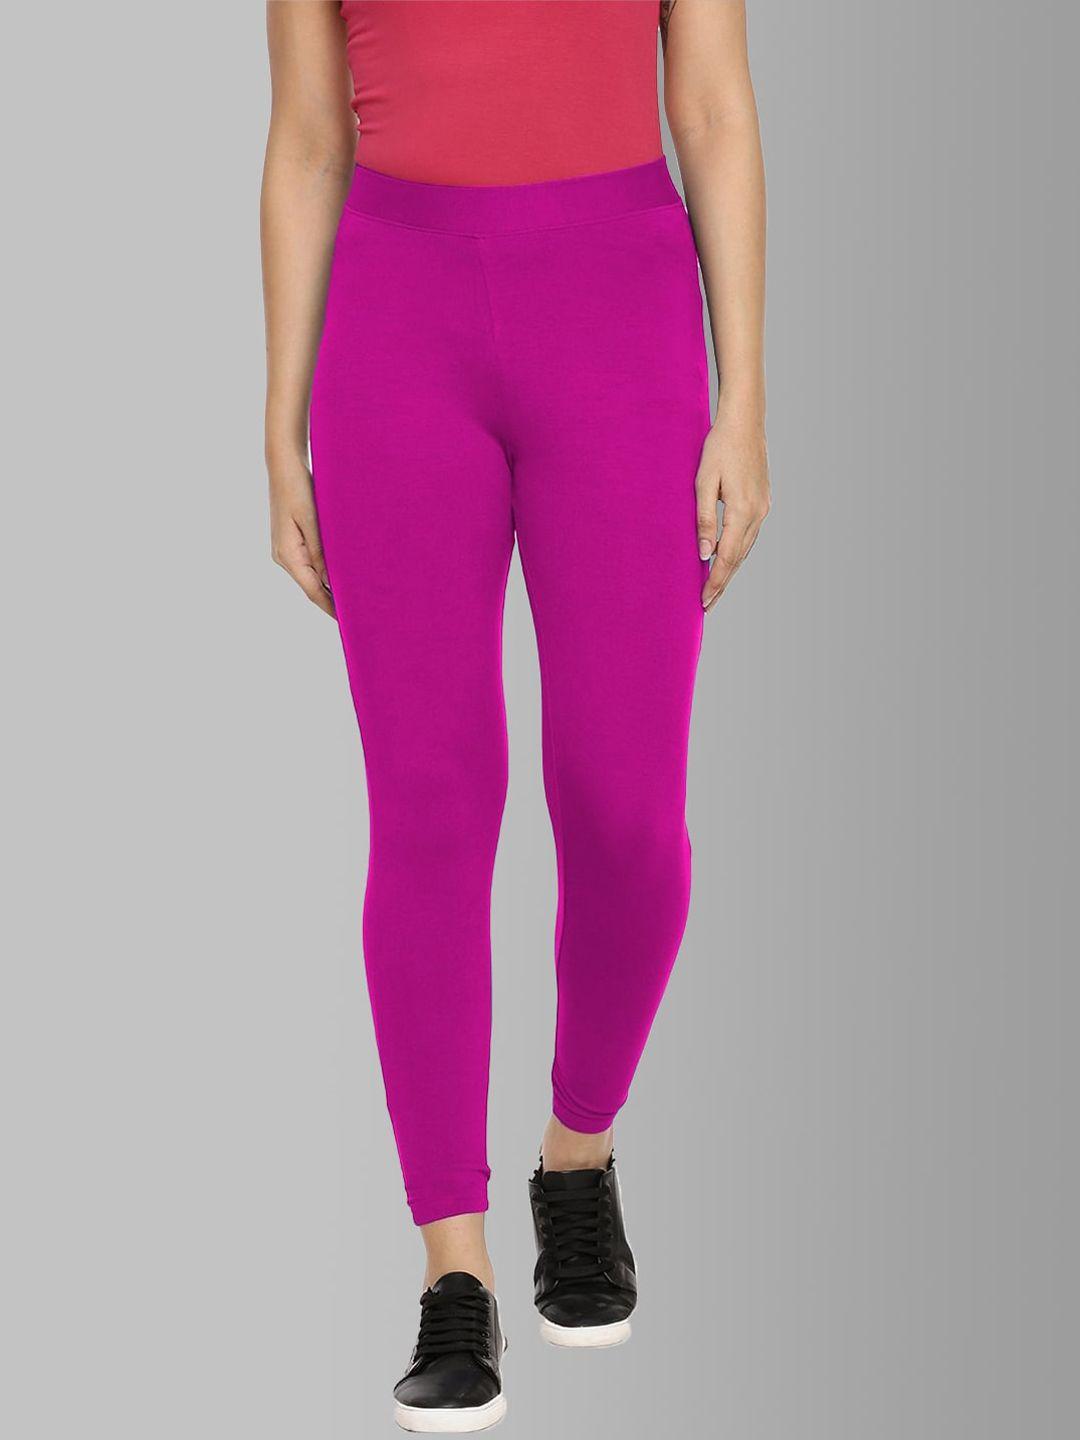 feather soft elite women magenta 7/8 active fit sports yoga tights